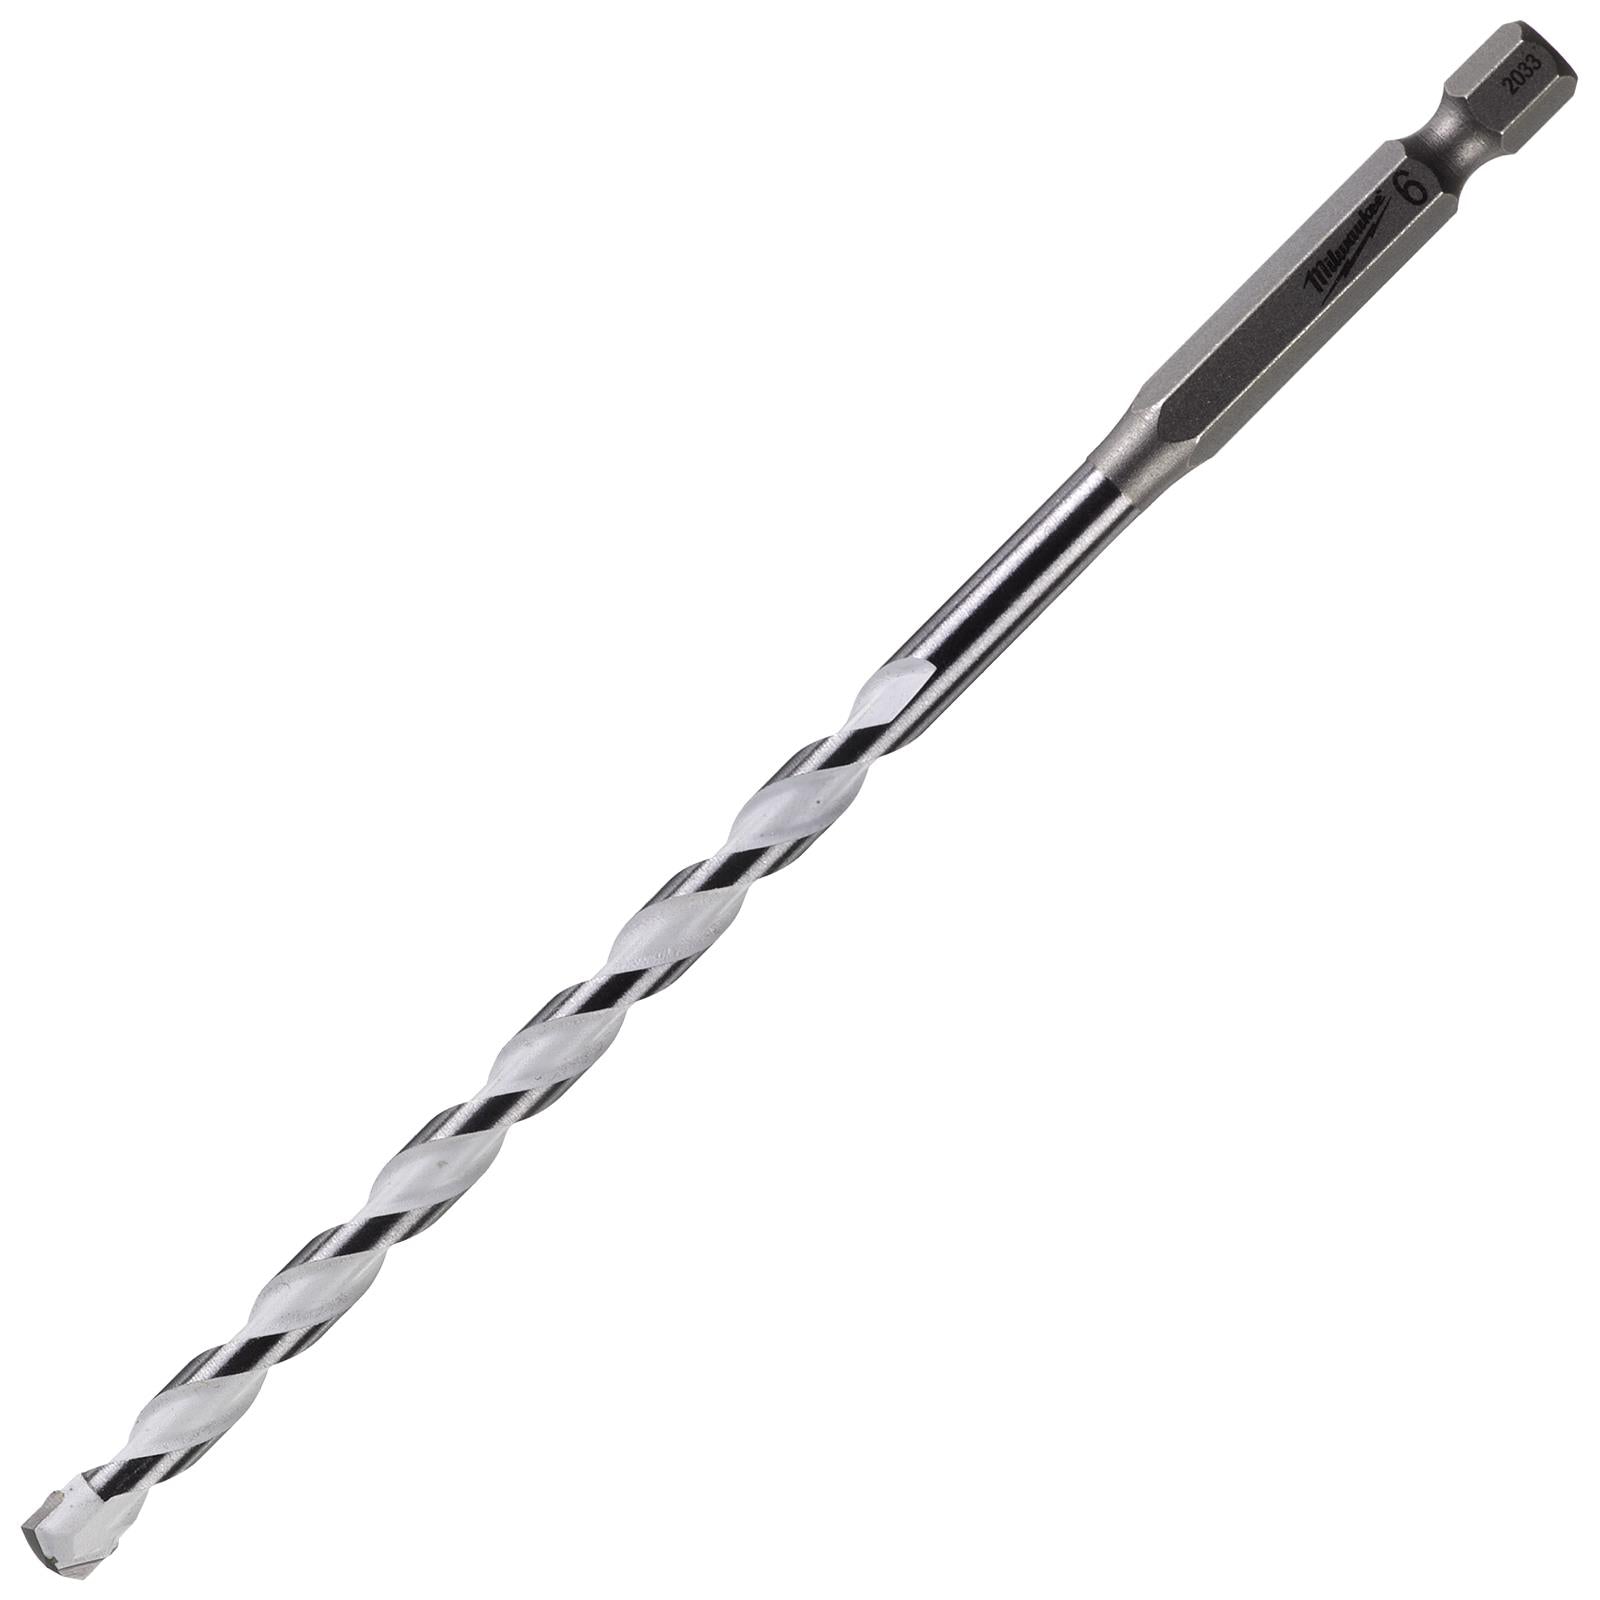 Milwaukee Multi Material Drill Bits Impact Rated TCT for Wood Metal Masonry